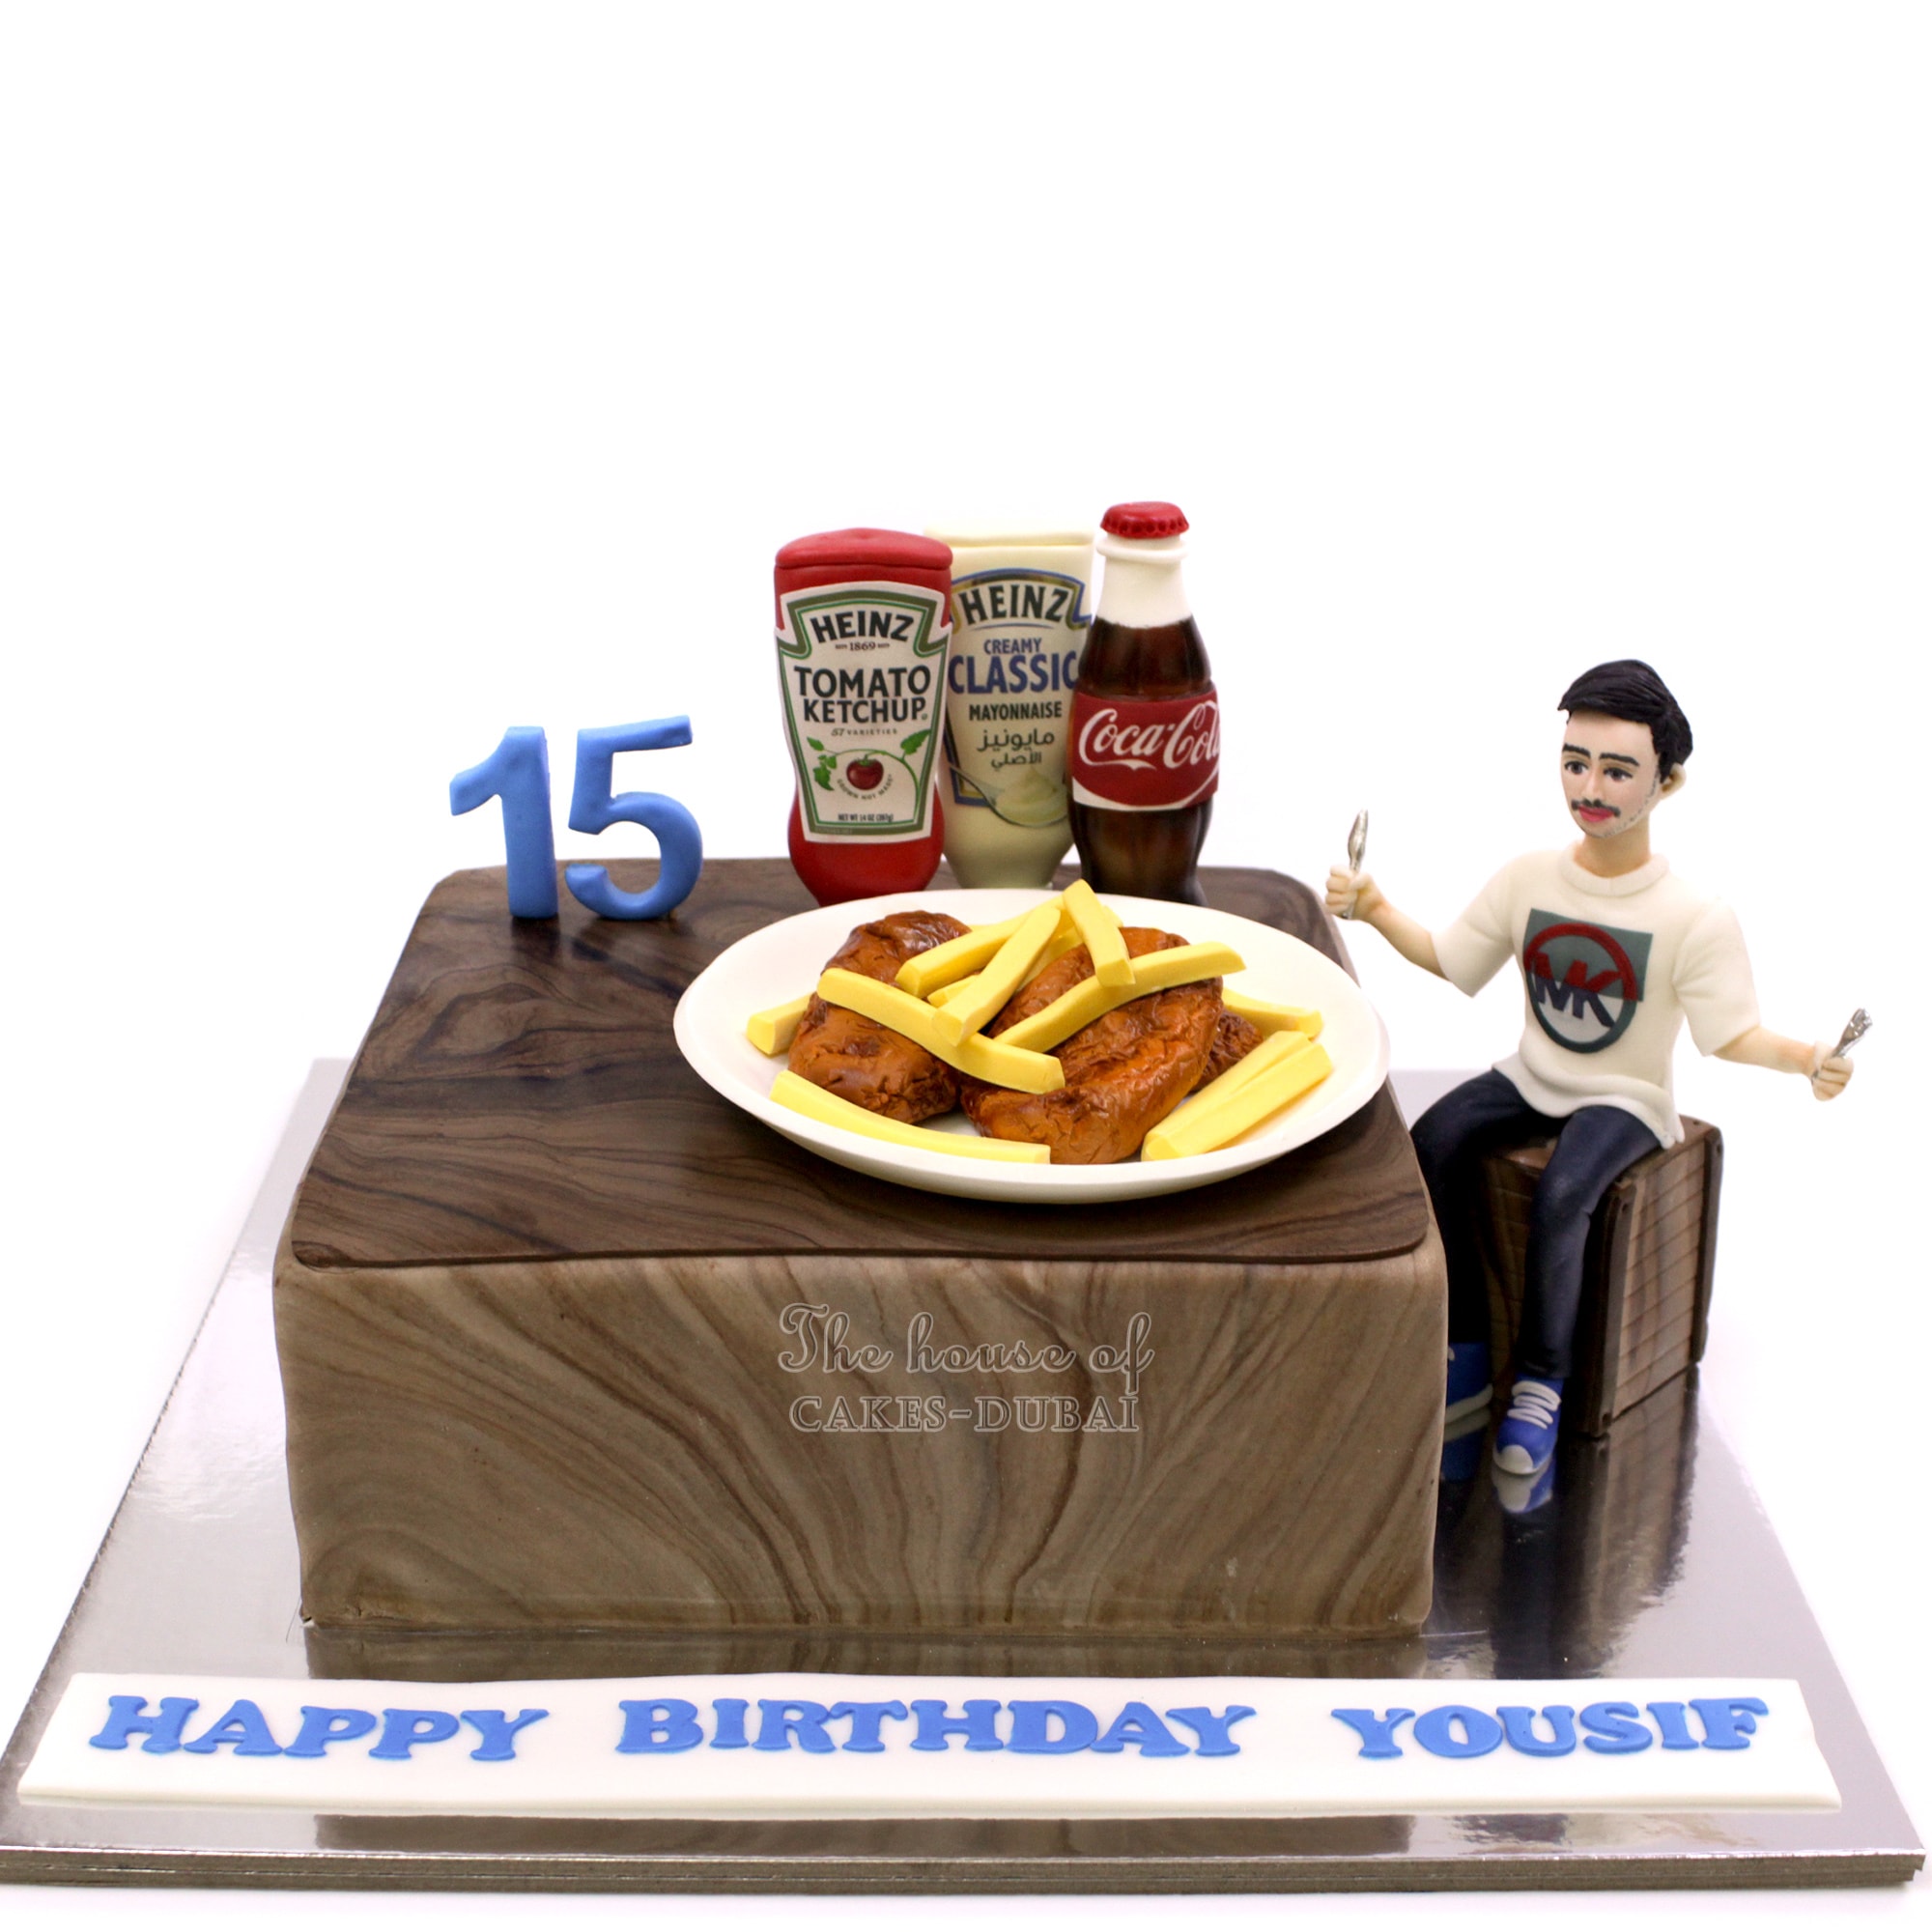 Details more than 107 tomato ketchup cake